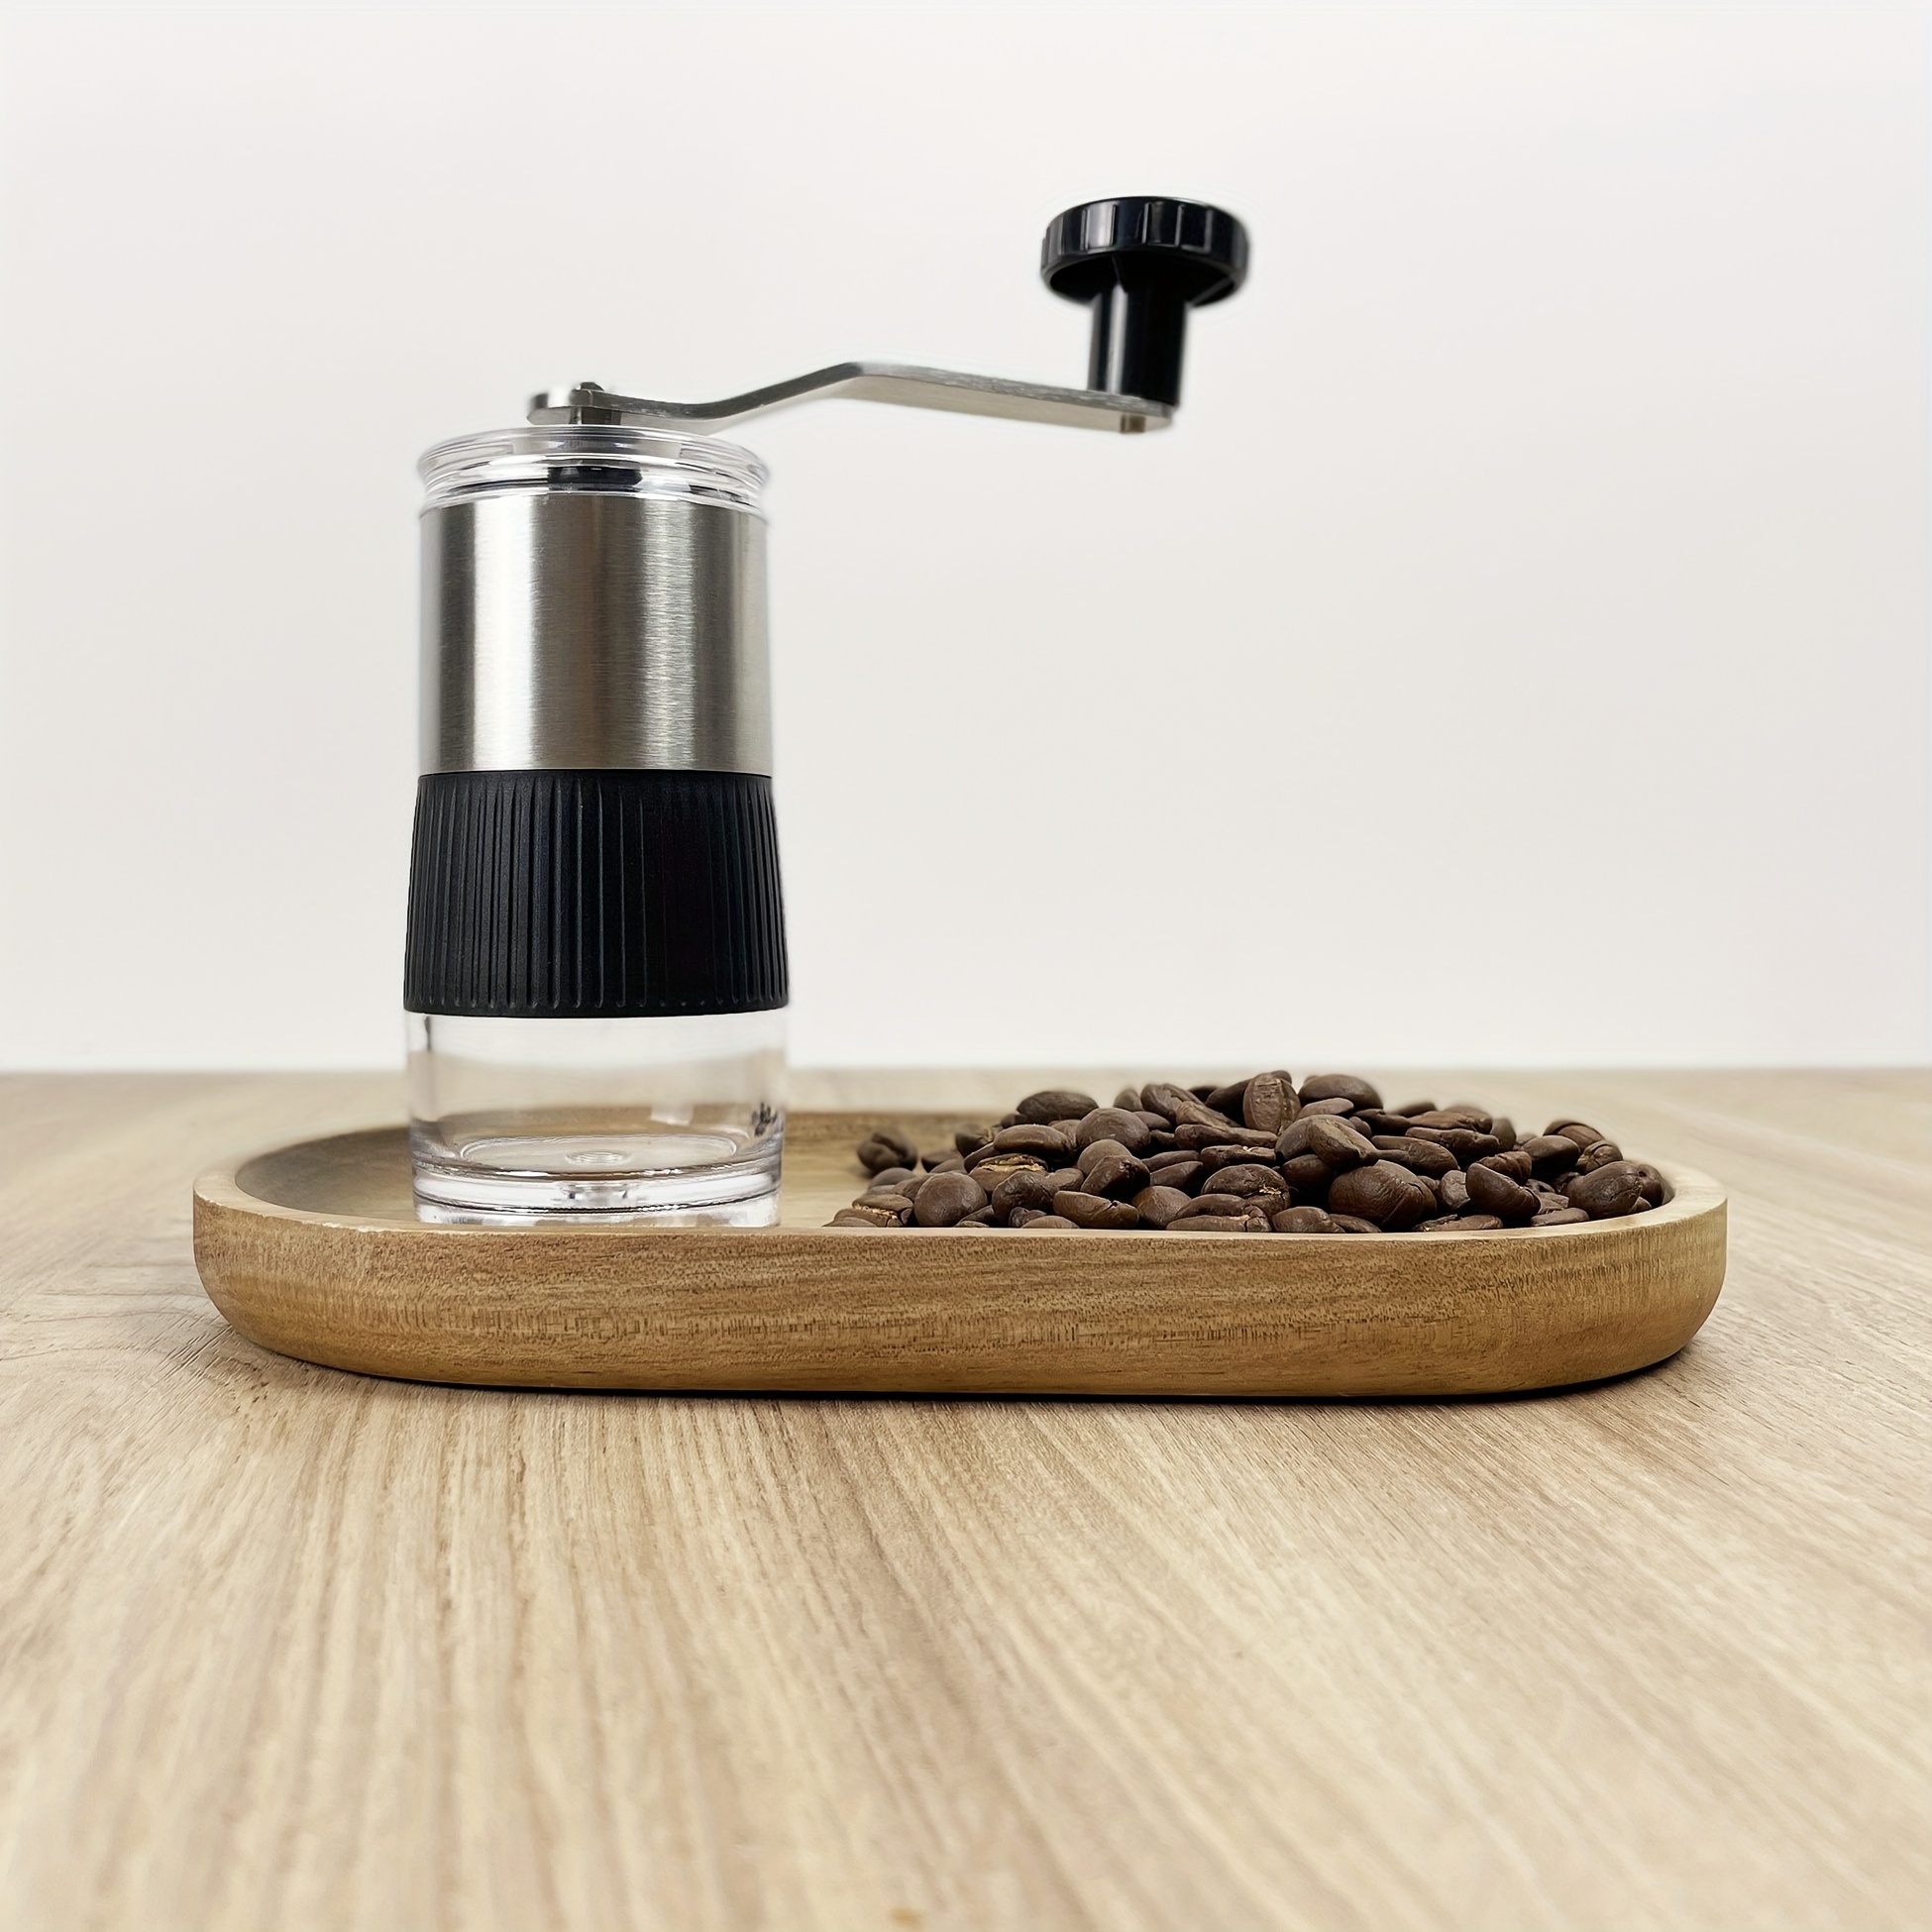 Coffee Mill Grinder - Manual Coffee Grinder with Adjustable Gear Setting  and Ceramic Conical Burr,Hand Mill Grinder for Home Use and Travel